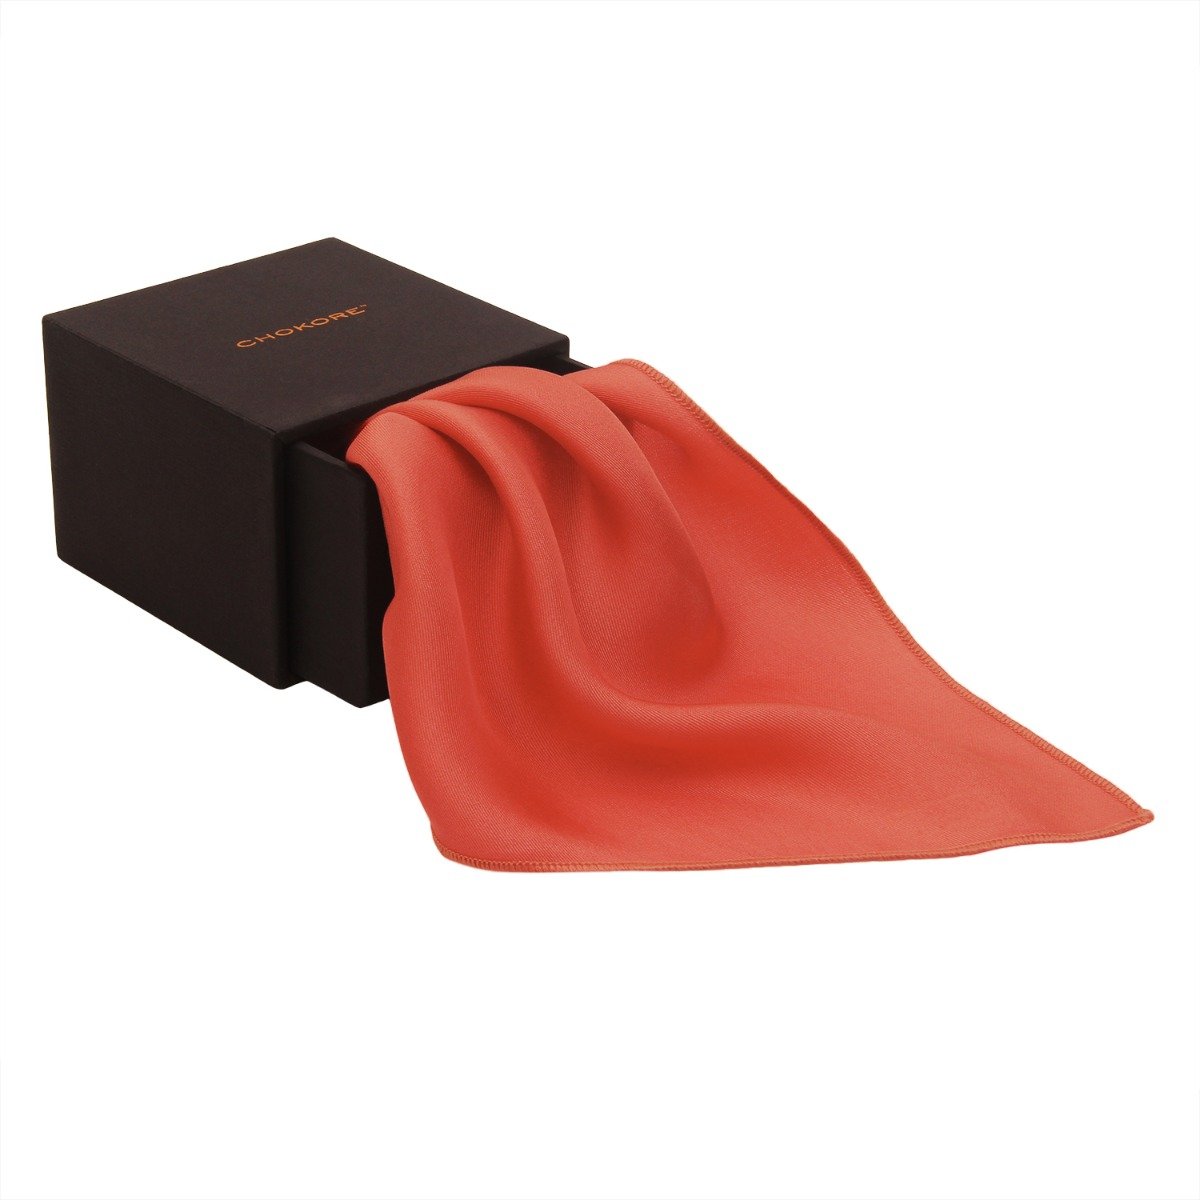 Chokore Coral Pure Silk Pocket Square, from the Solids Line